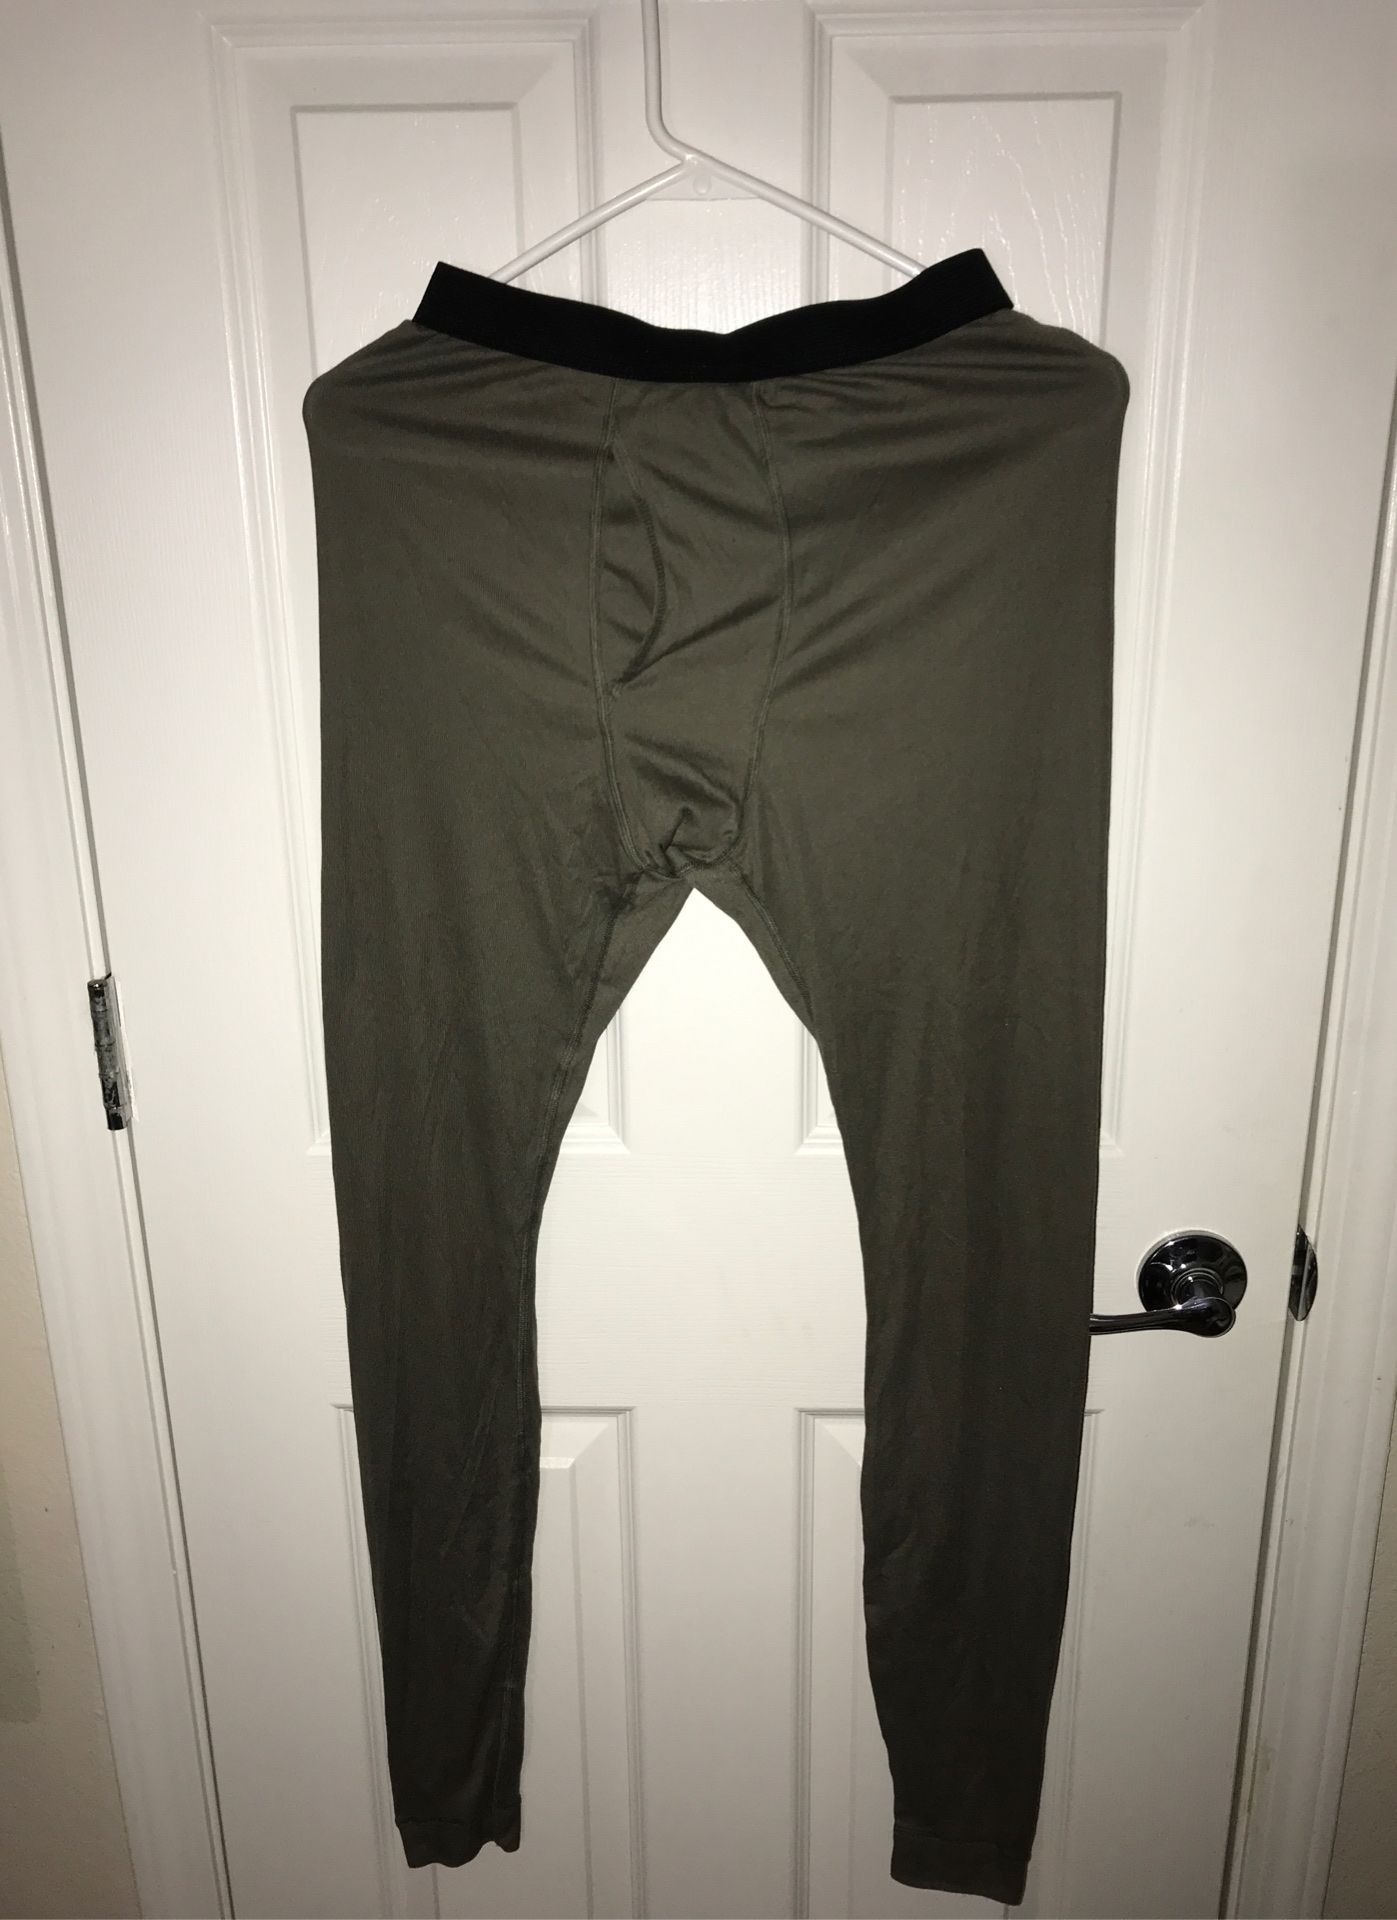 3 PATAGONIA CAPILENE BOTTOMS (M) WITH TAGS